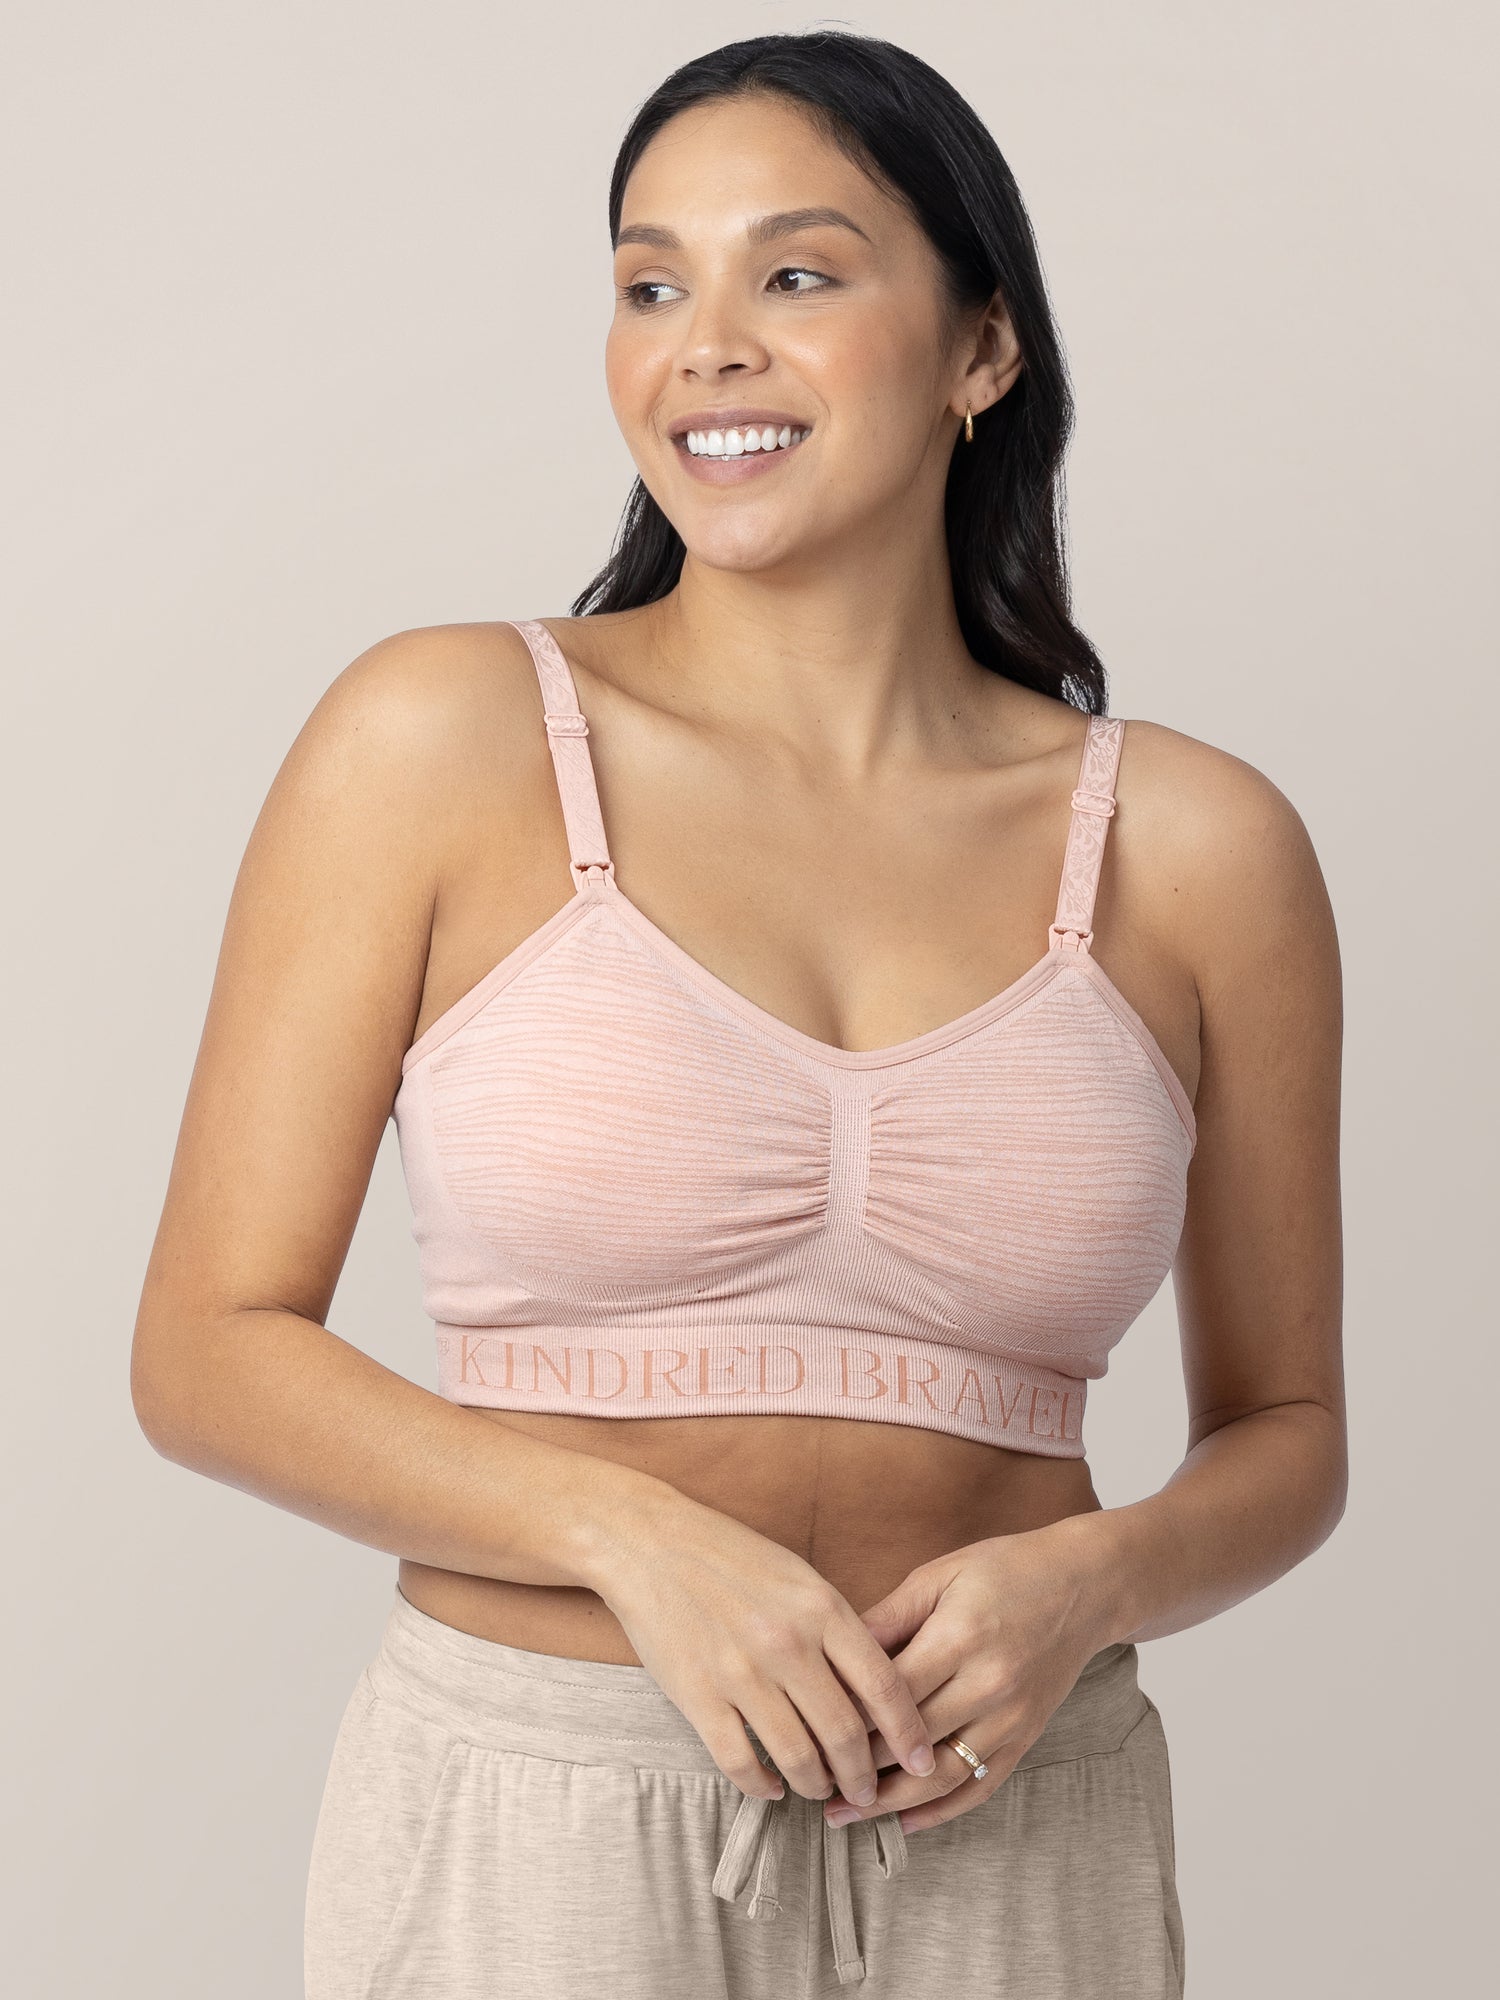 Kindred Bravely Women's Sublime Pumping + Nursing Hands Free Bra -  Heathered Pink 1x-busty : Target